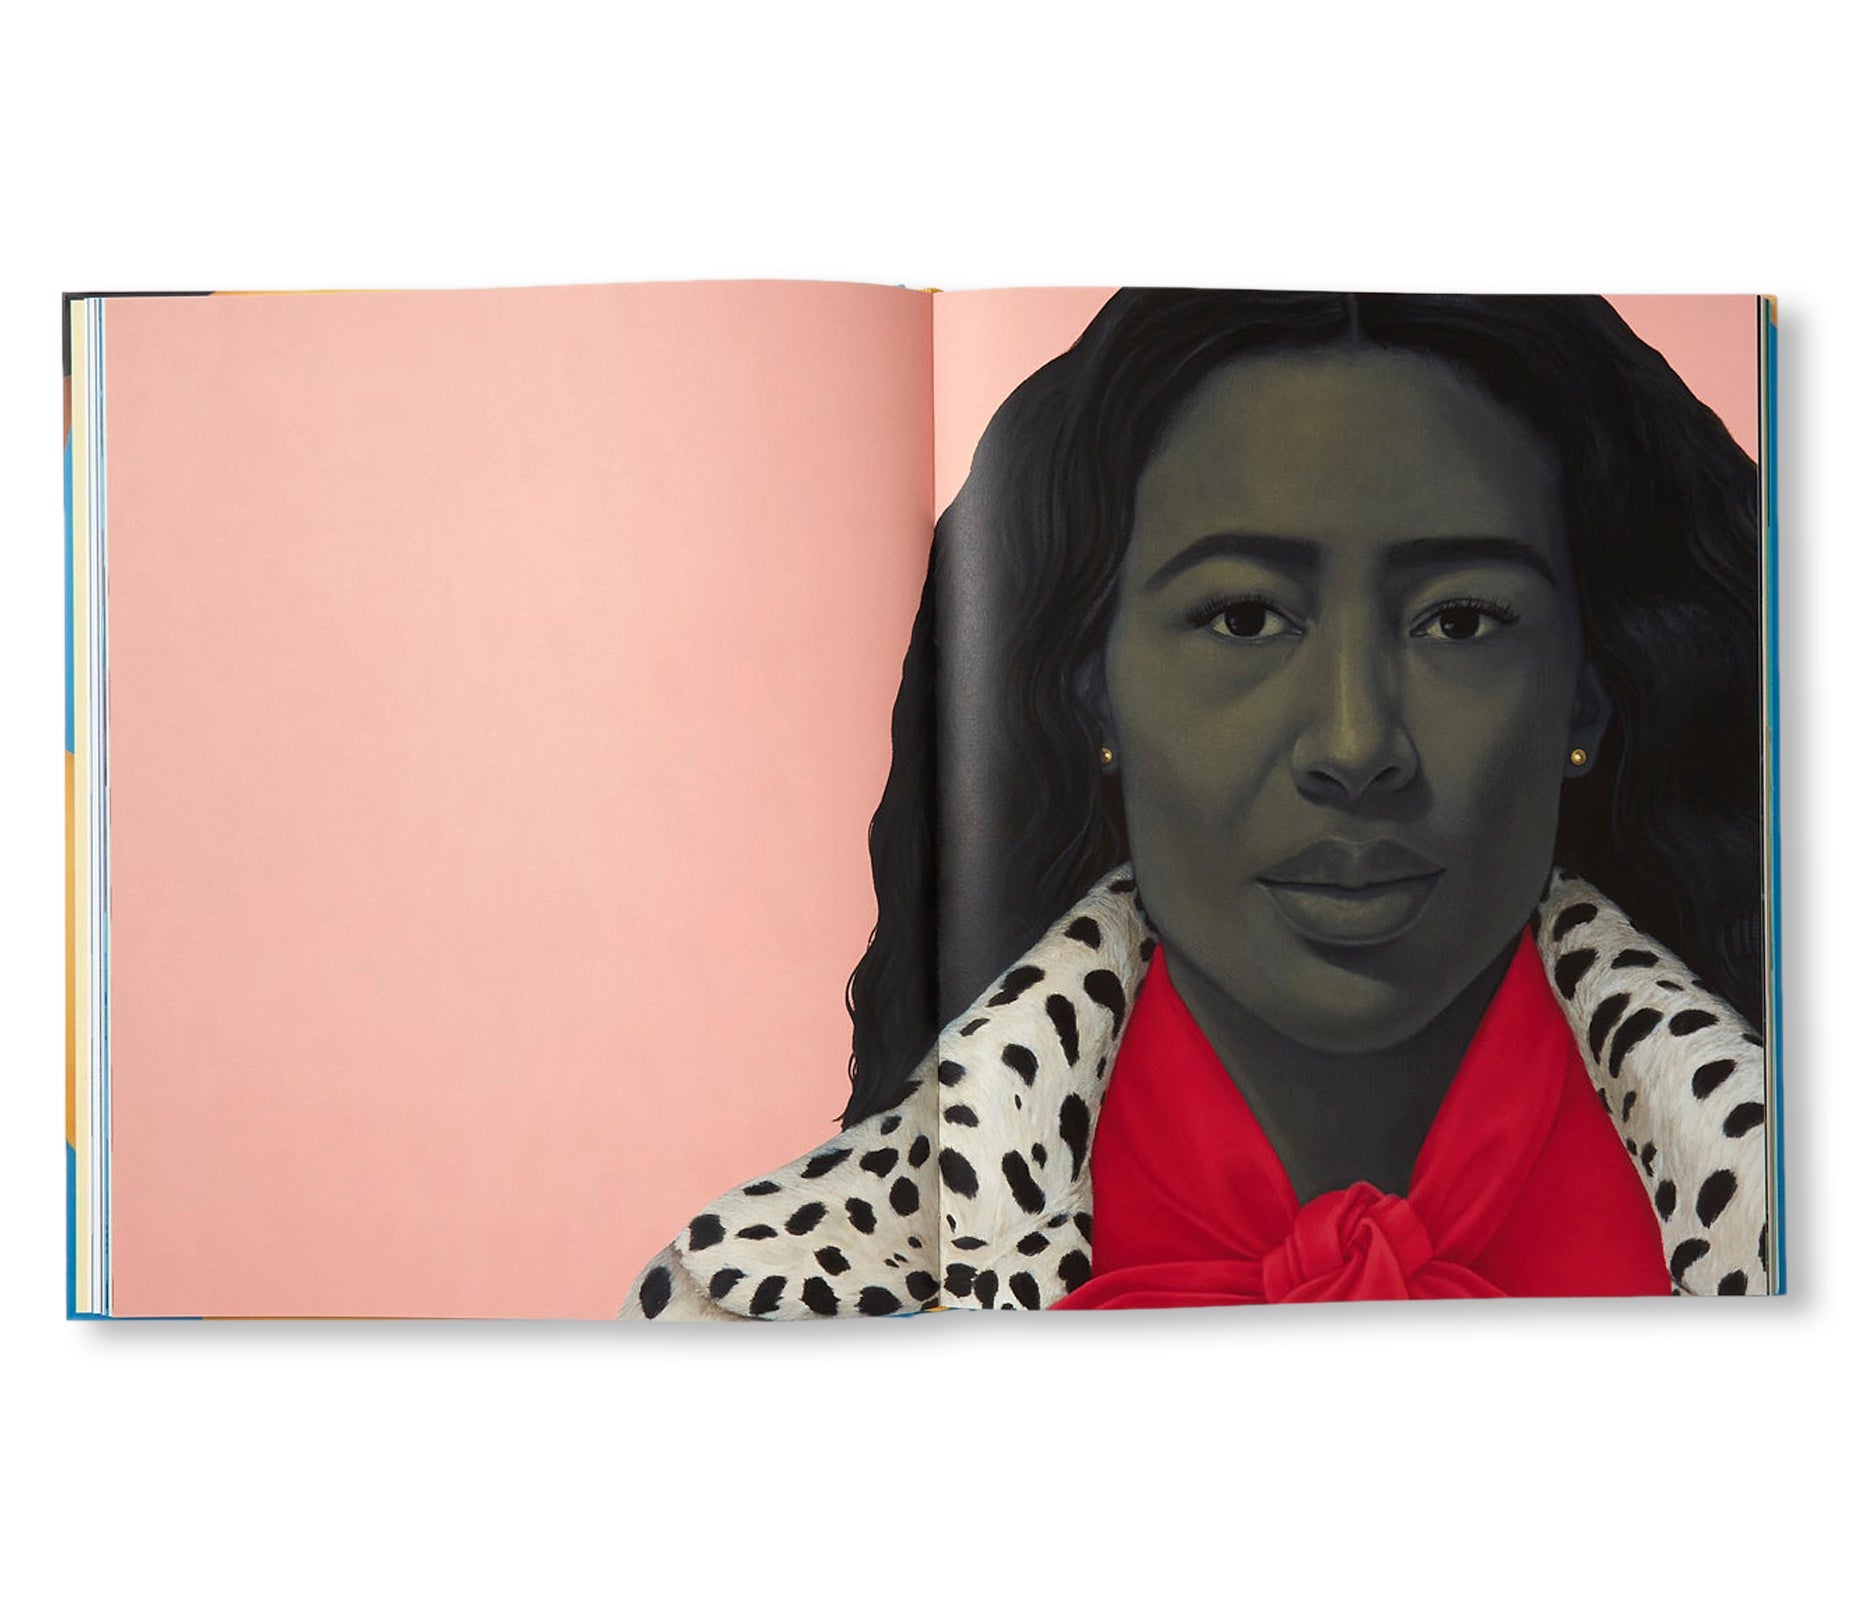 THE WORLD WE MAKE by Amy Sherald